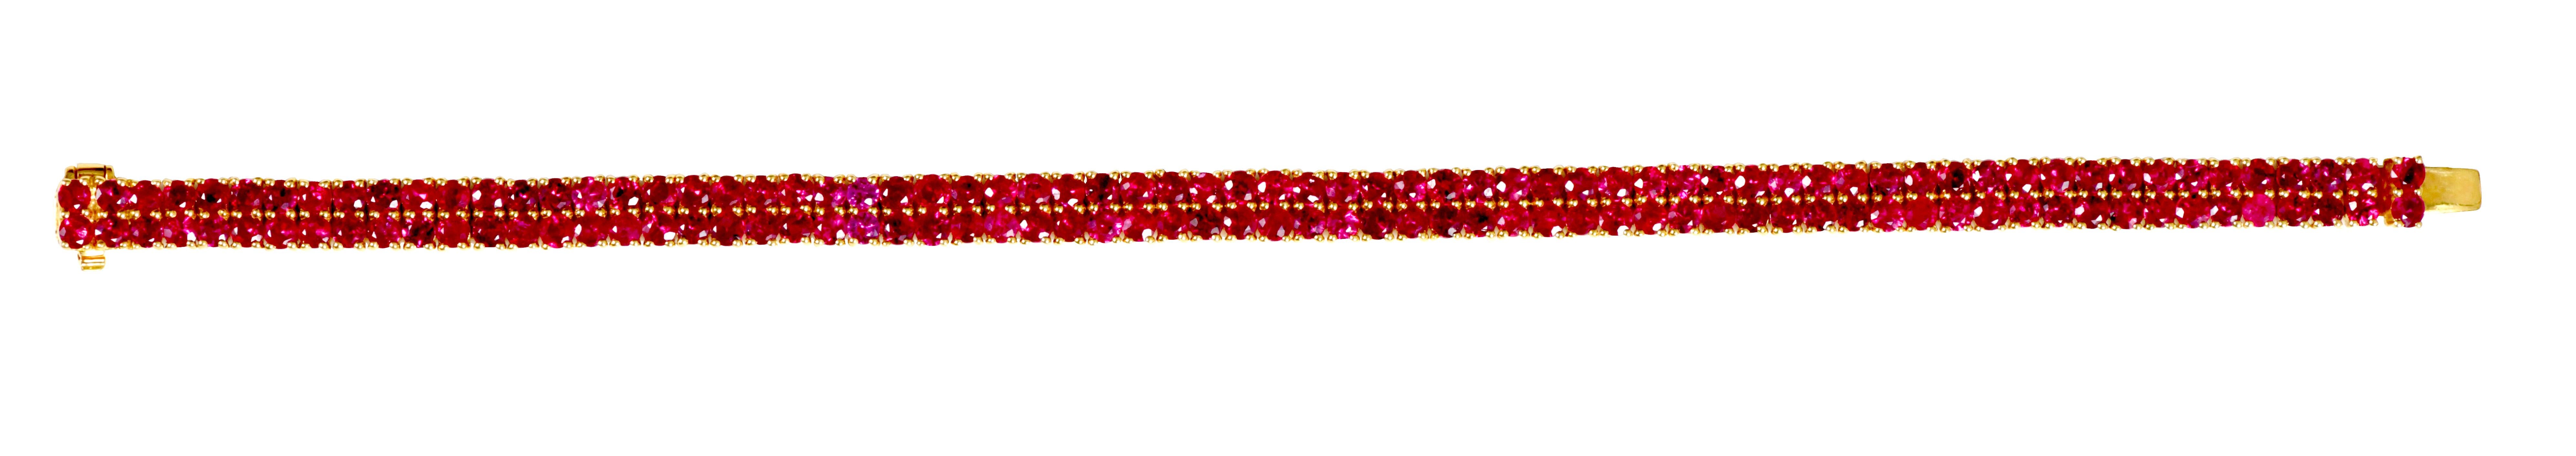 18 Karat Yellow Gold 11.13 Carat Ruby Double-Row Contemporary Style Tennis Bracelet

The sparkle of beautiful rubies, the essence of its rarity, all wrapped around your wrist. This bracelet is a sparkling treat to the eyes and the heart. Each